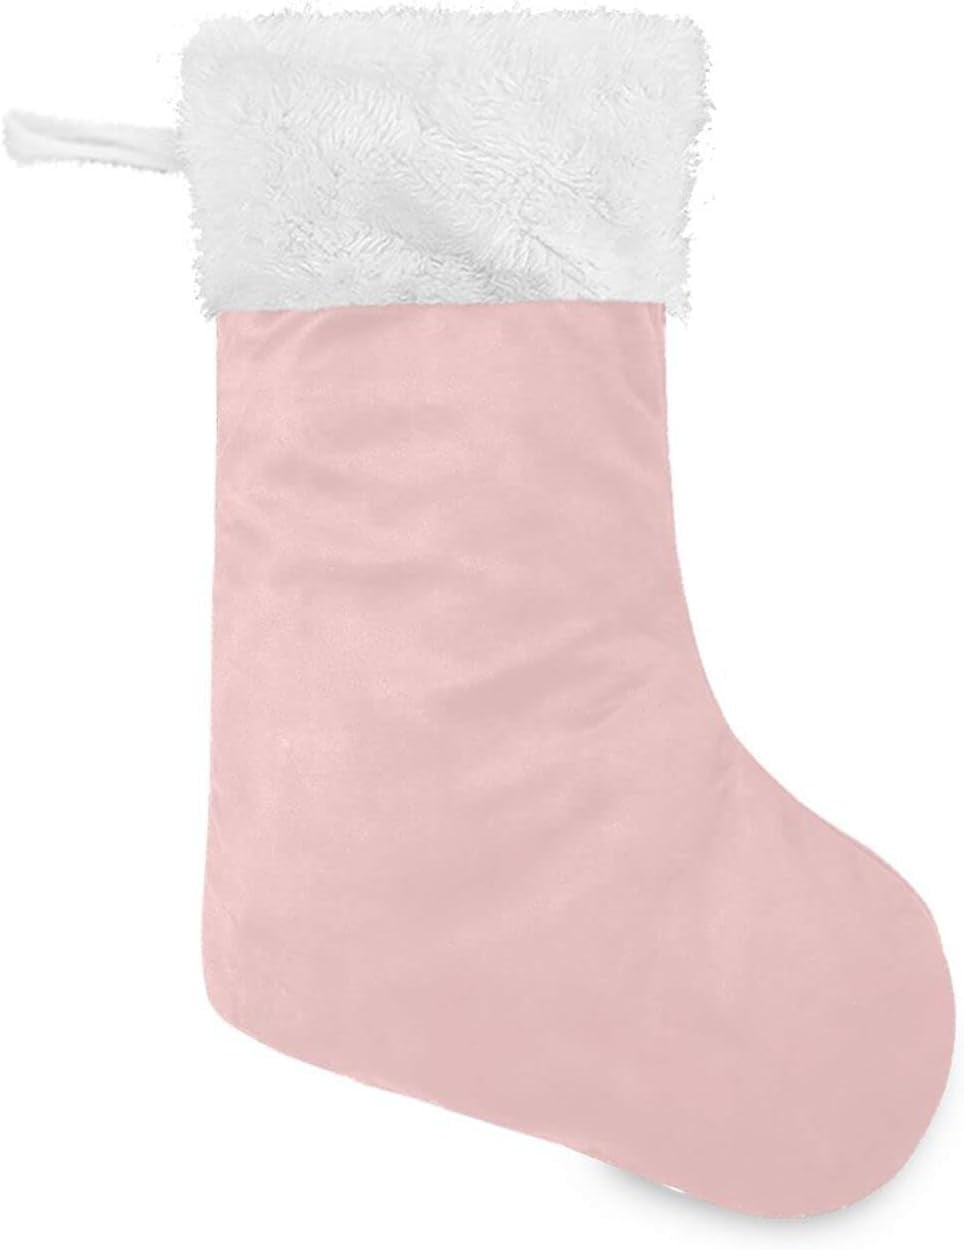 Coolnut 17.7 Inch Christmas Stockings, Plain Bright Pink Solid Color ...